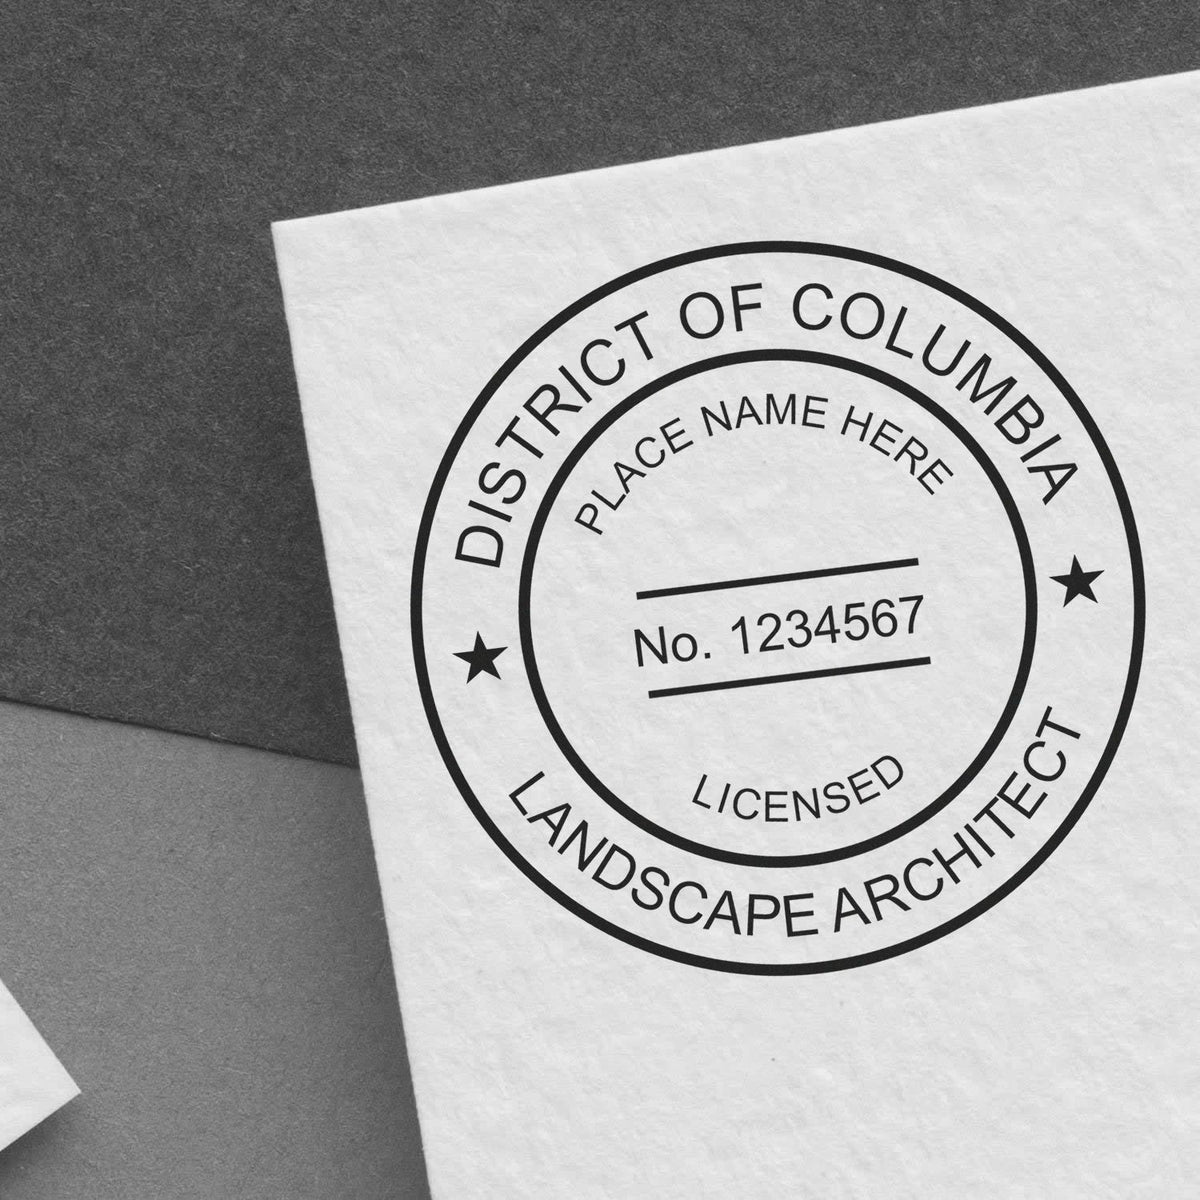 This paper is stamped with a sample imprint of the Slim Pre-Inked District of Columbia Landscape Architect Seal Stamp, signifying its quality and reliability.